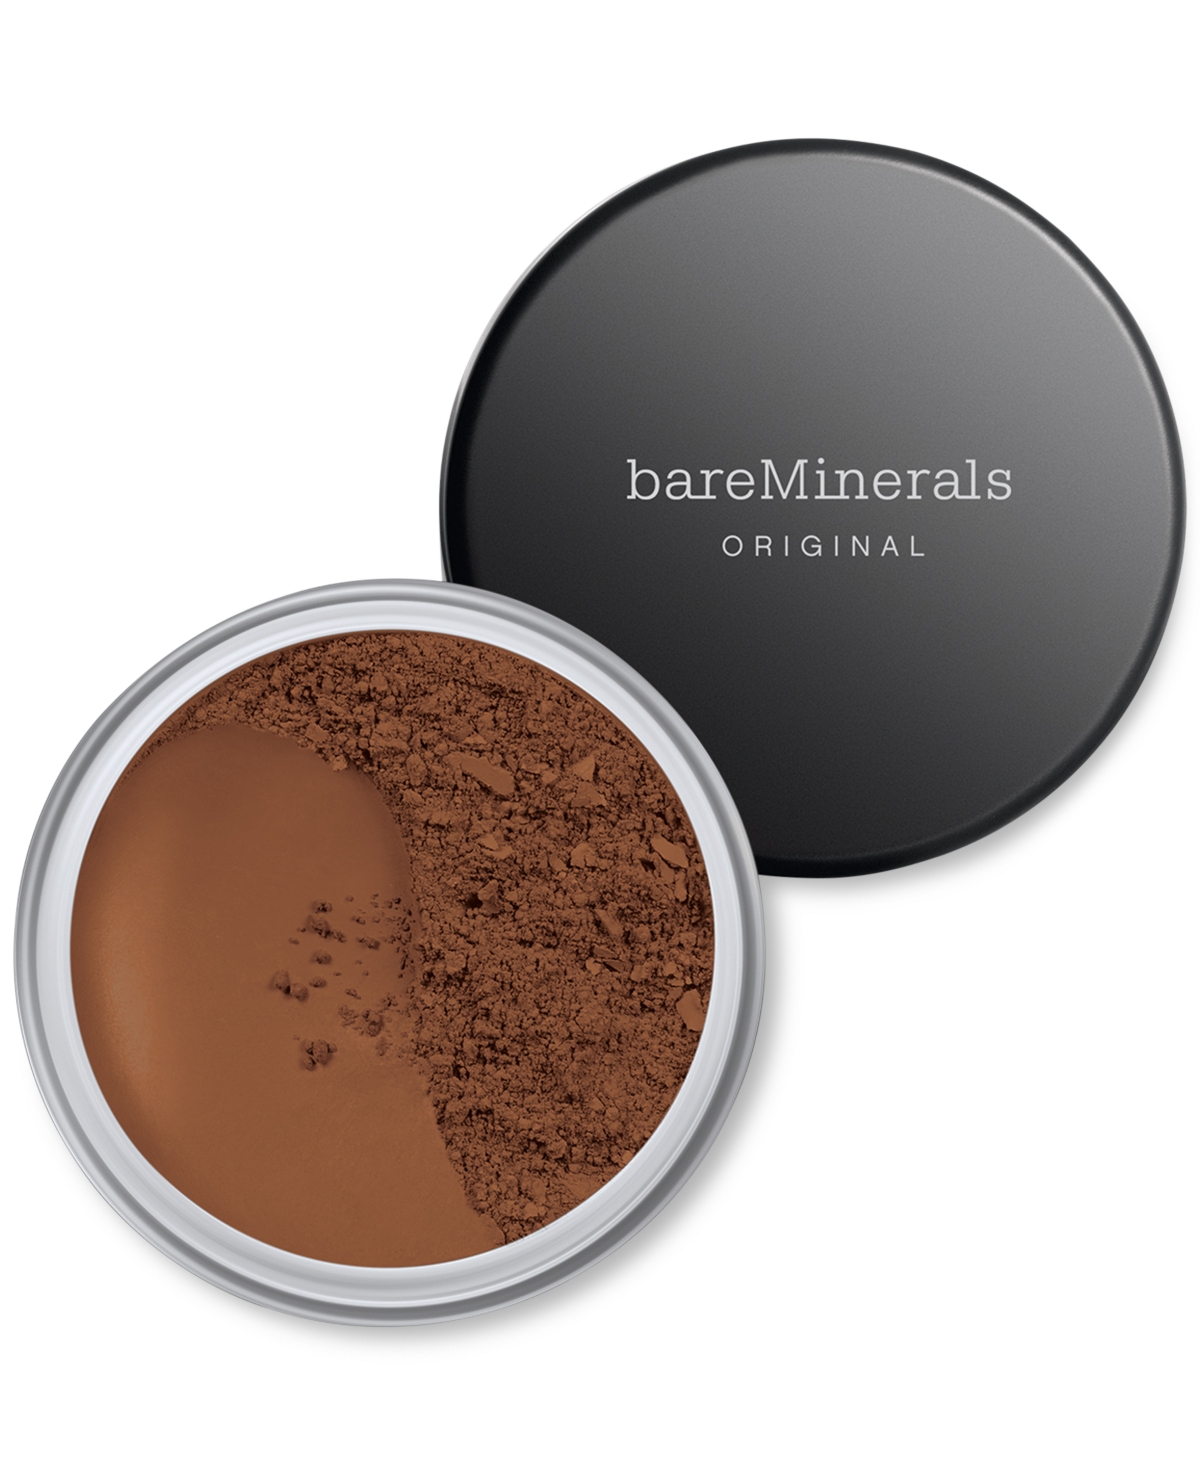 Bareminerals Original Loose Powder Foundation Spf 15 In Deepest Deep  - For Deepest Skin With Co